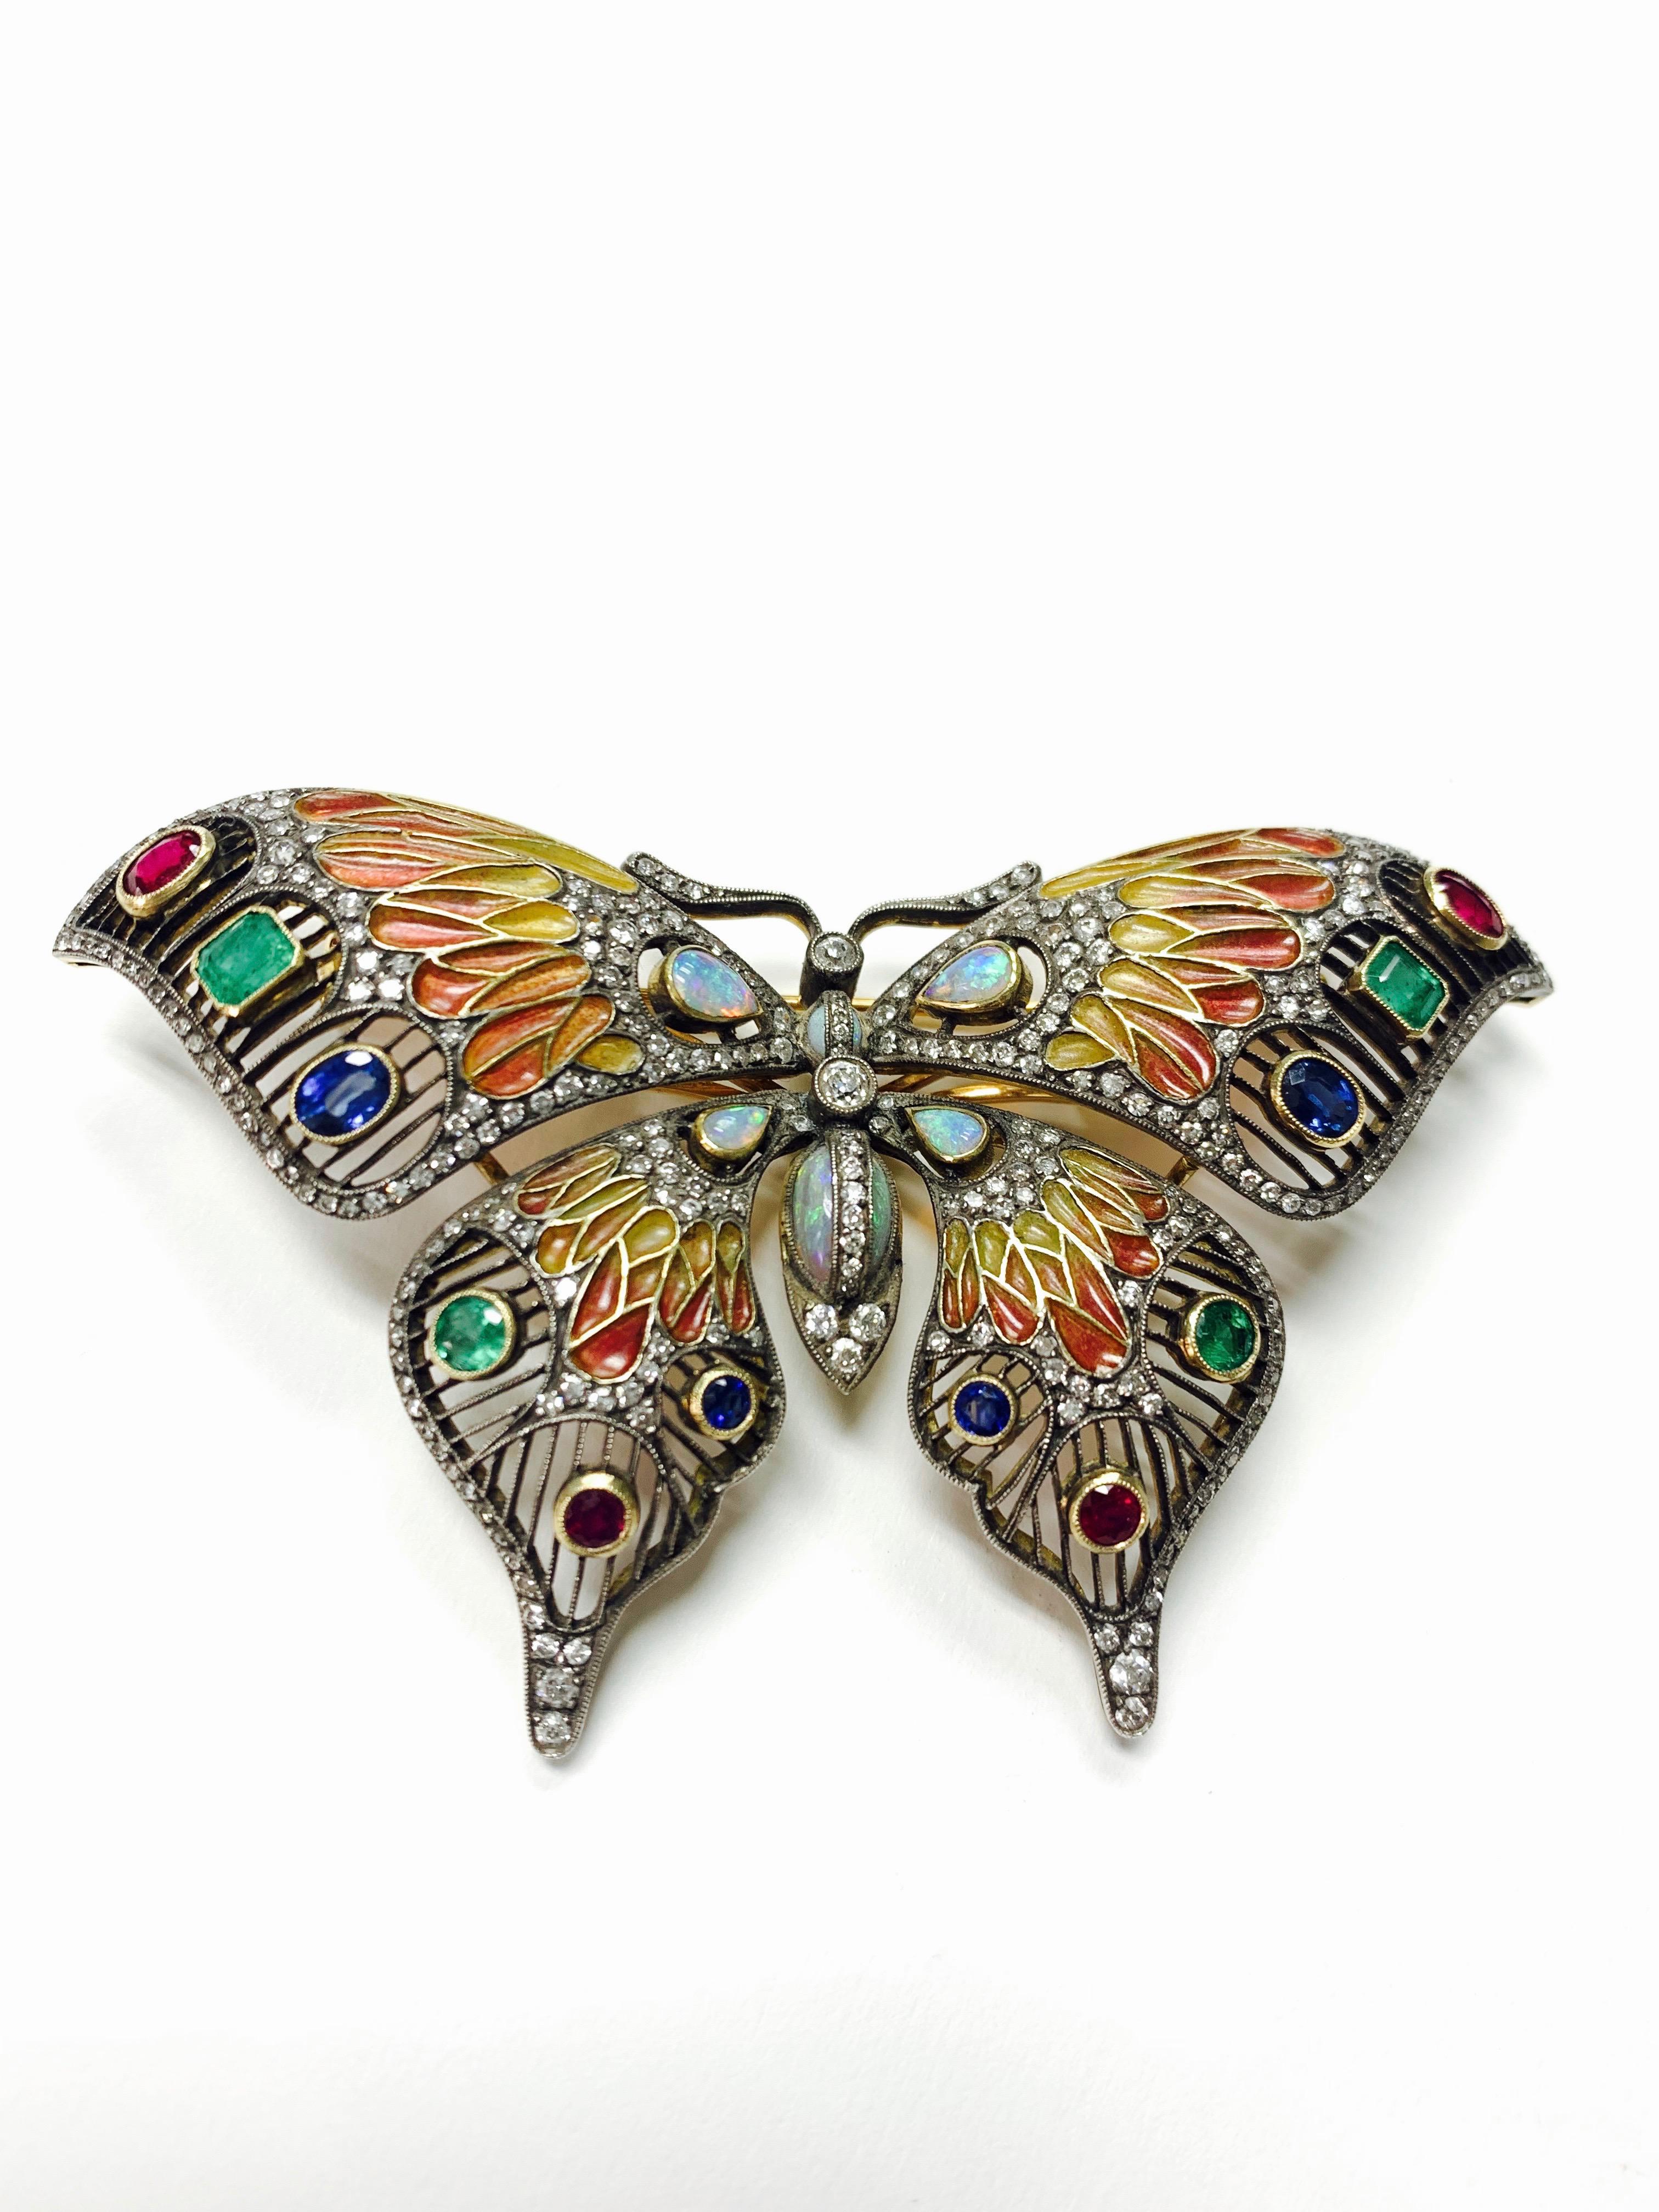 Diamond, opal, emerald, blue sapphire and rubies butterfly broach in 18k and silver. 
The details are as follows : 
Diamond weight : 3.05 carat 
Opal weight : 3.75 carat 
Emerald, Blue sapphire , rubies weight : 4.35 carat 
Metal : 18 K gold and